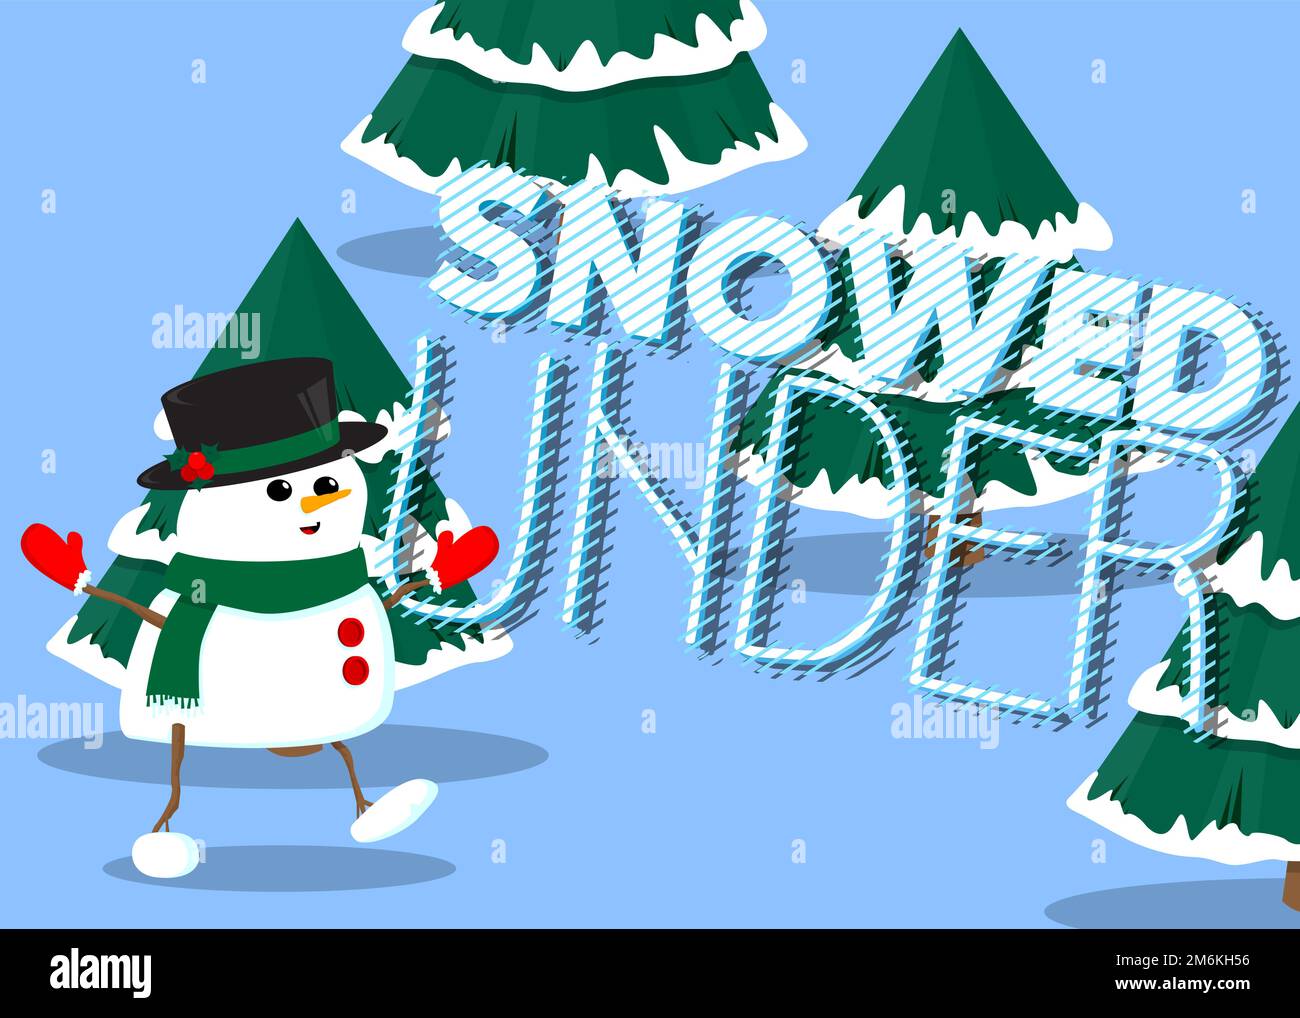 Snowman wearing hat and scarf with Snowed Under text. Card, Winter event poster, banner. Stock Vector